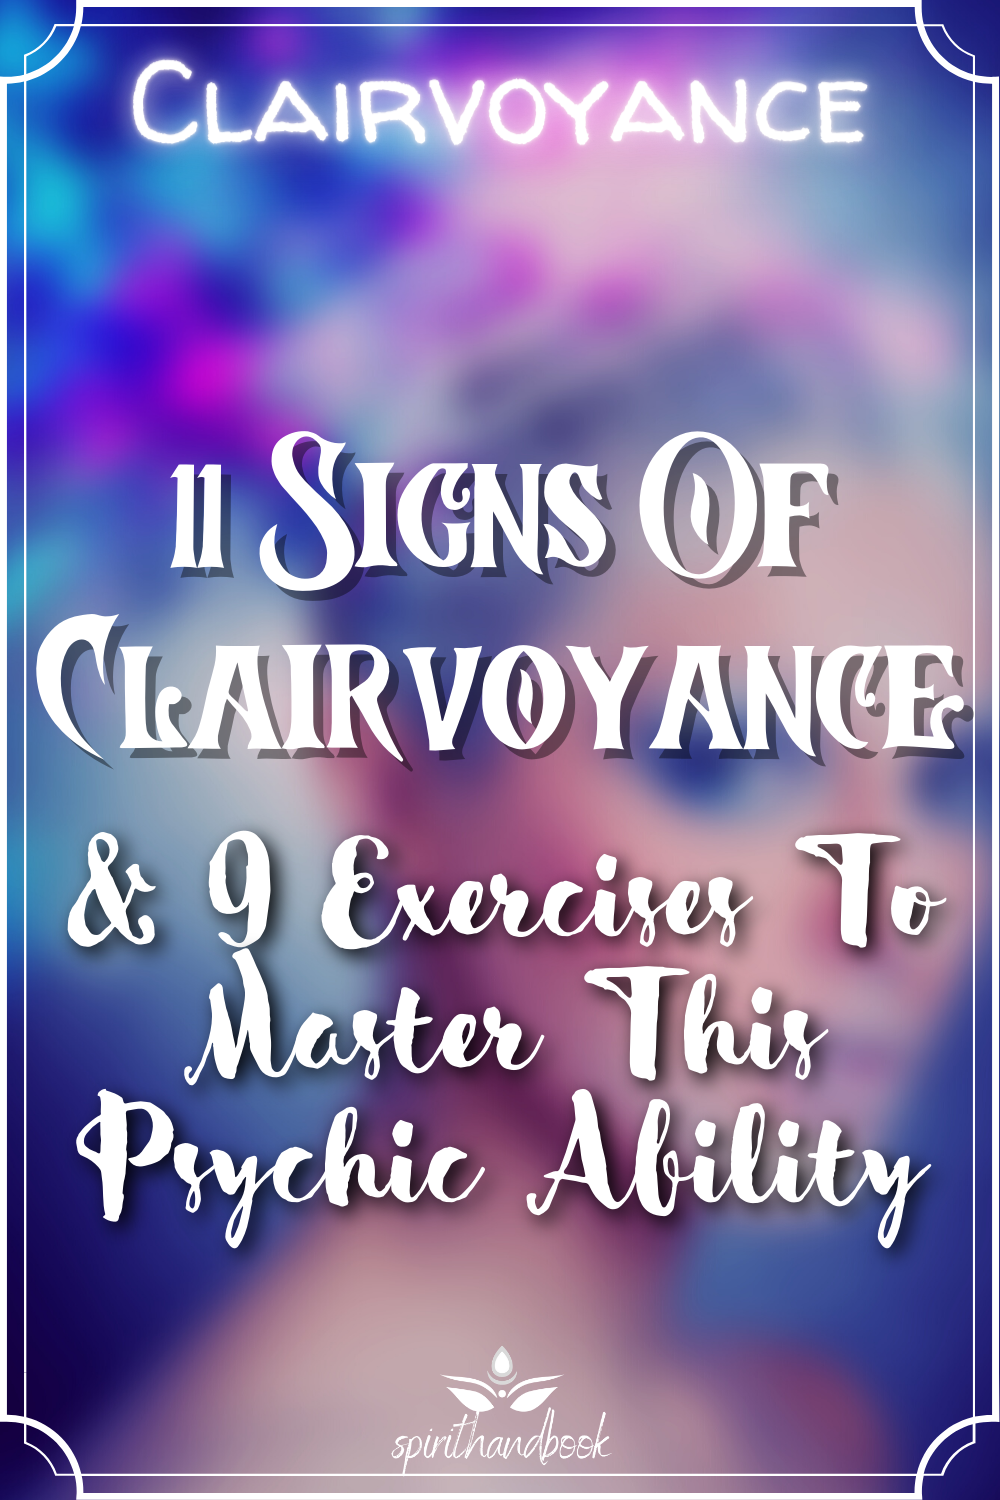 11 Signs of Clairvoyance And 9 Effective Exercises